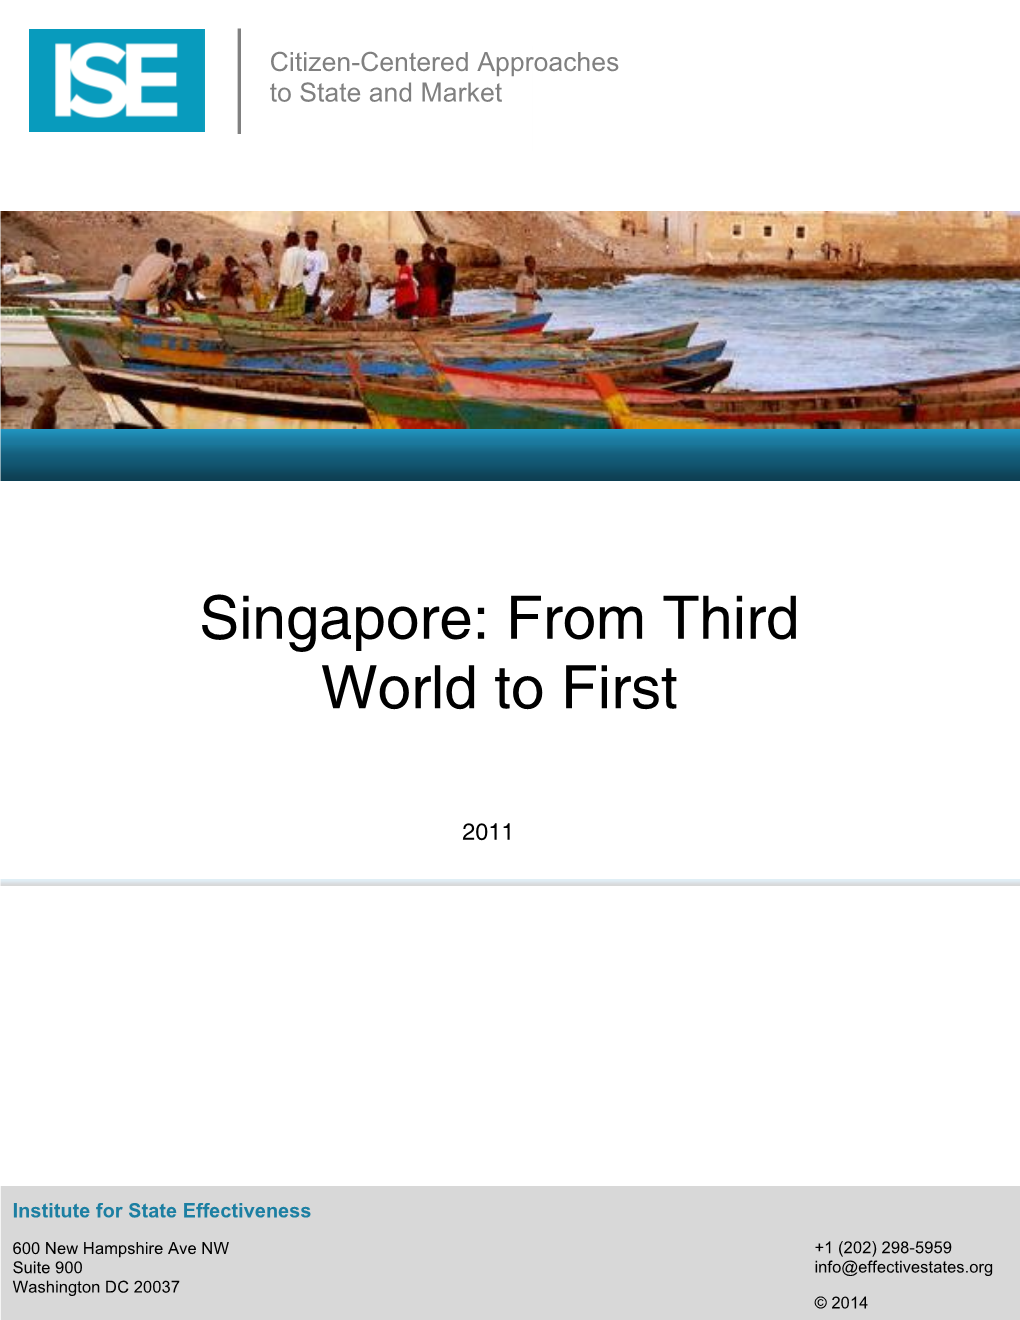 Singapore: from Third World to First